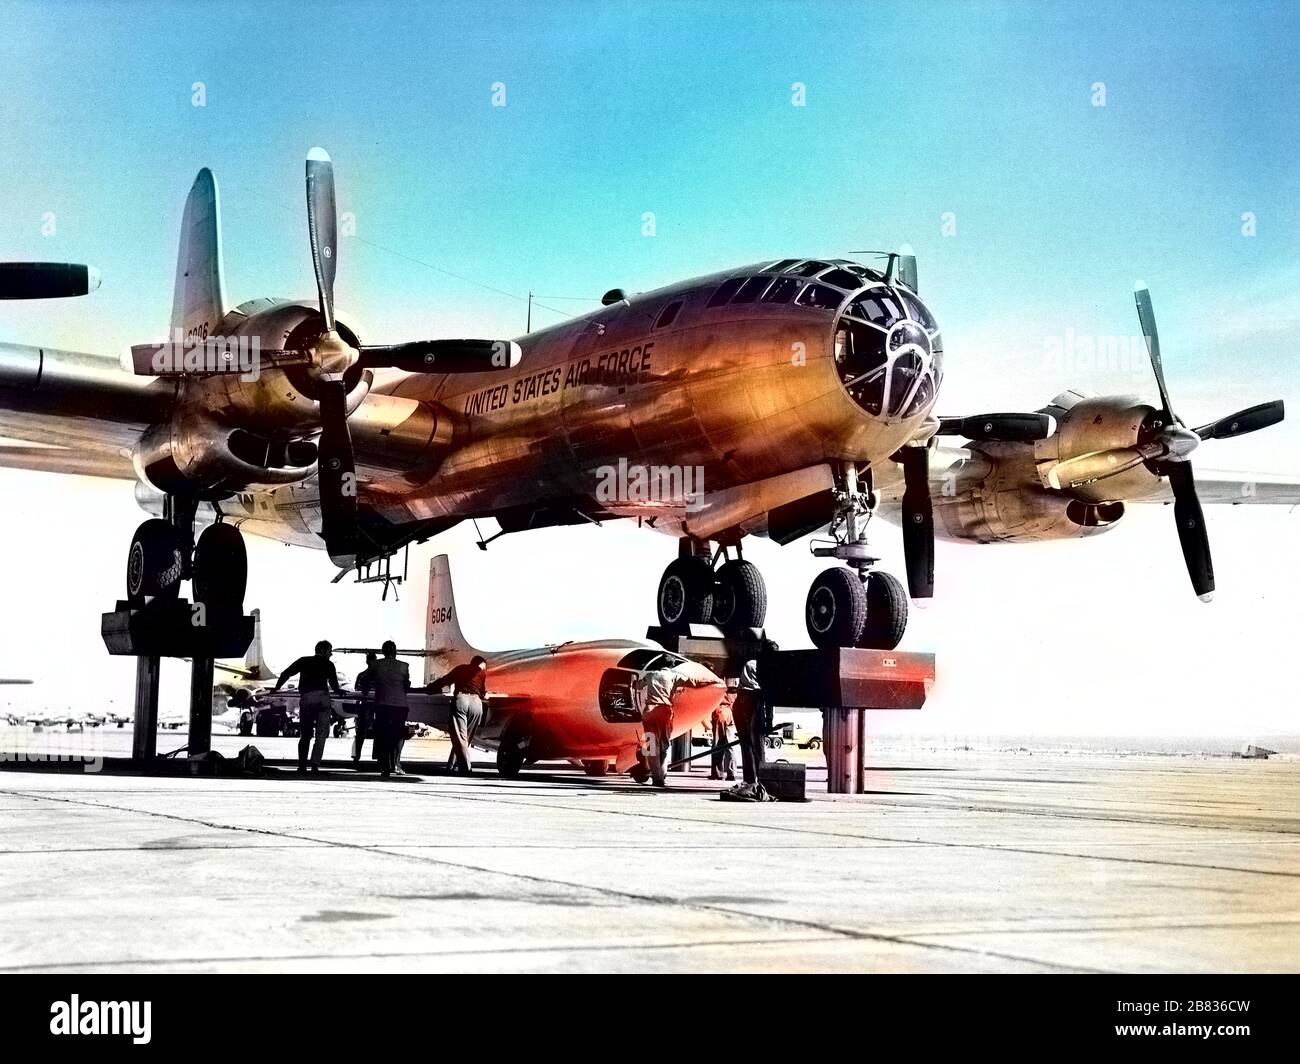 X-1 'Queenie' aircraft mated to the EB-50A 'Superfortress' aircraft at Edwards Air Force Base, Kern County, California, November 9, 1951. Image courtesy National Aeronautics and Space Administration (NASA). Note: Image has been digitally colorized using a modern process. Colors may not be period-accurate. () Stock Photo